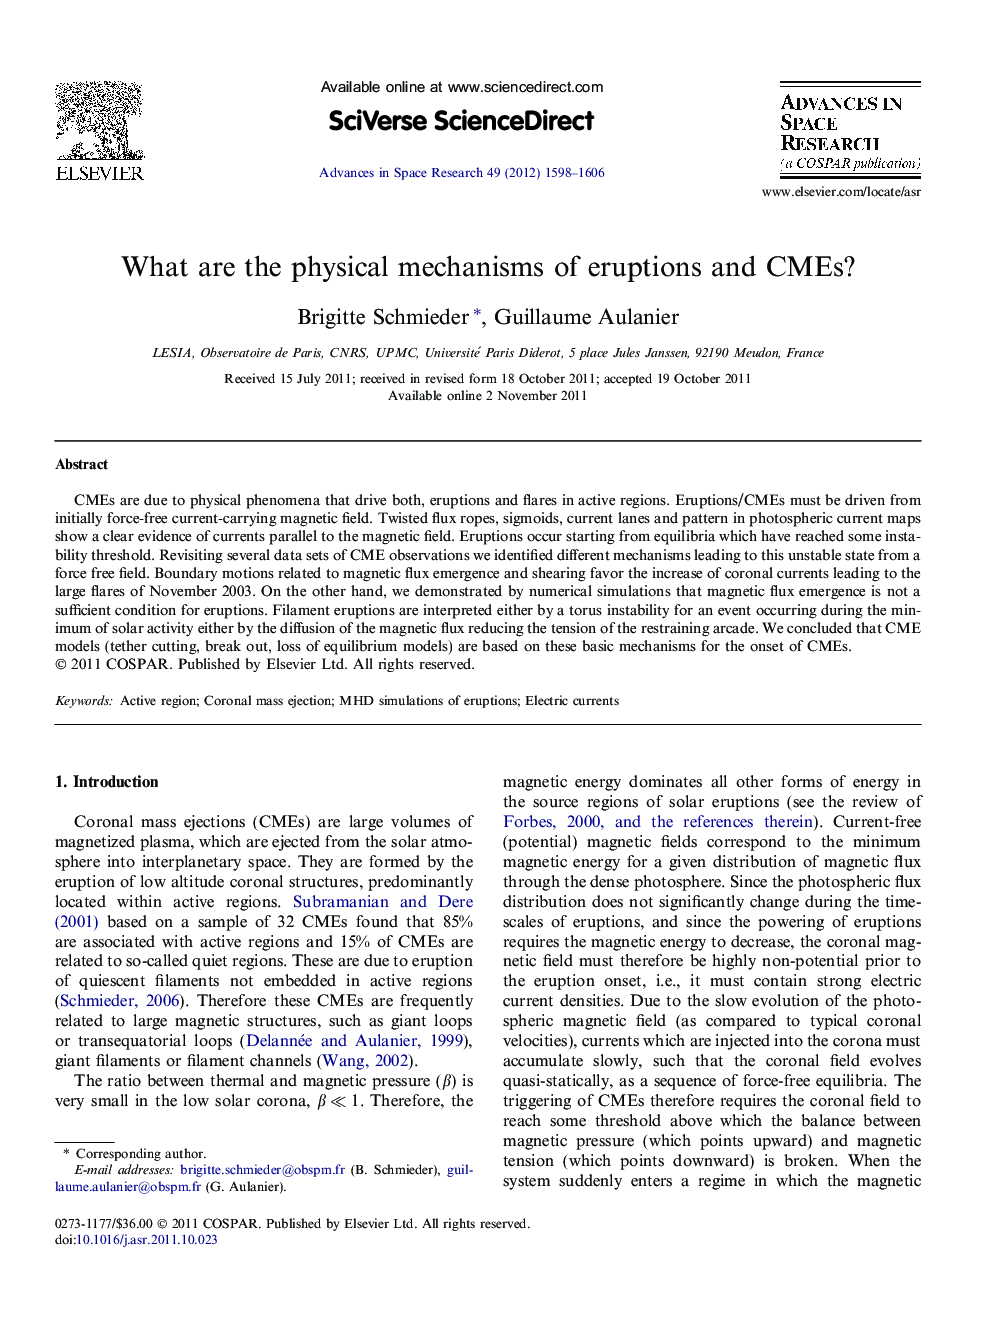 What are the physical mechanisms of eruptions and CMEs?